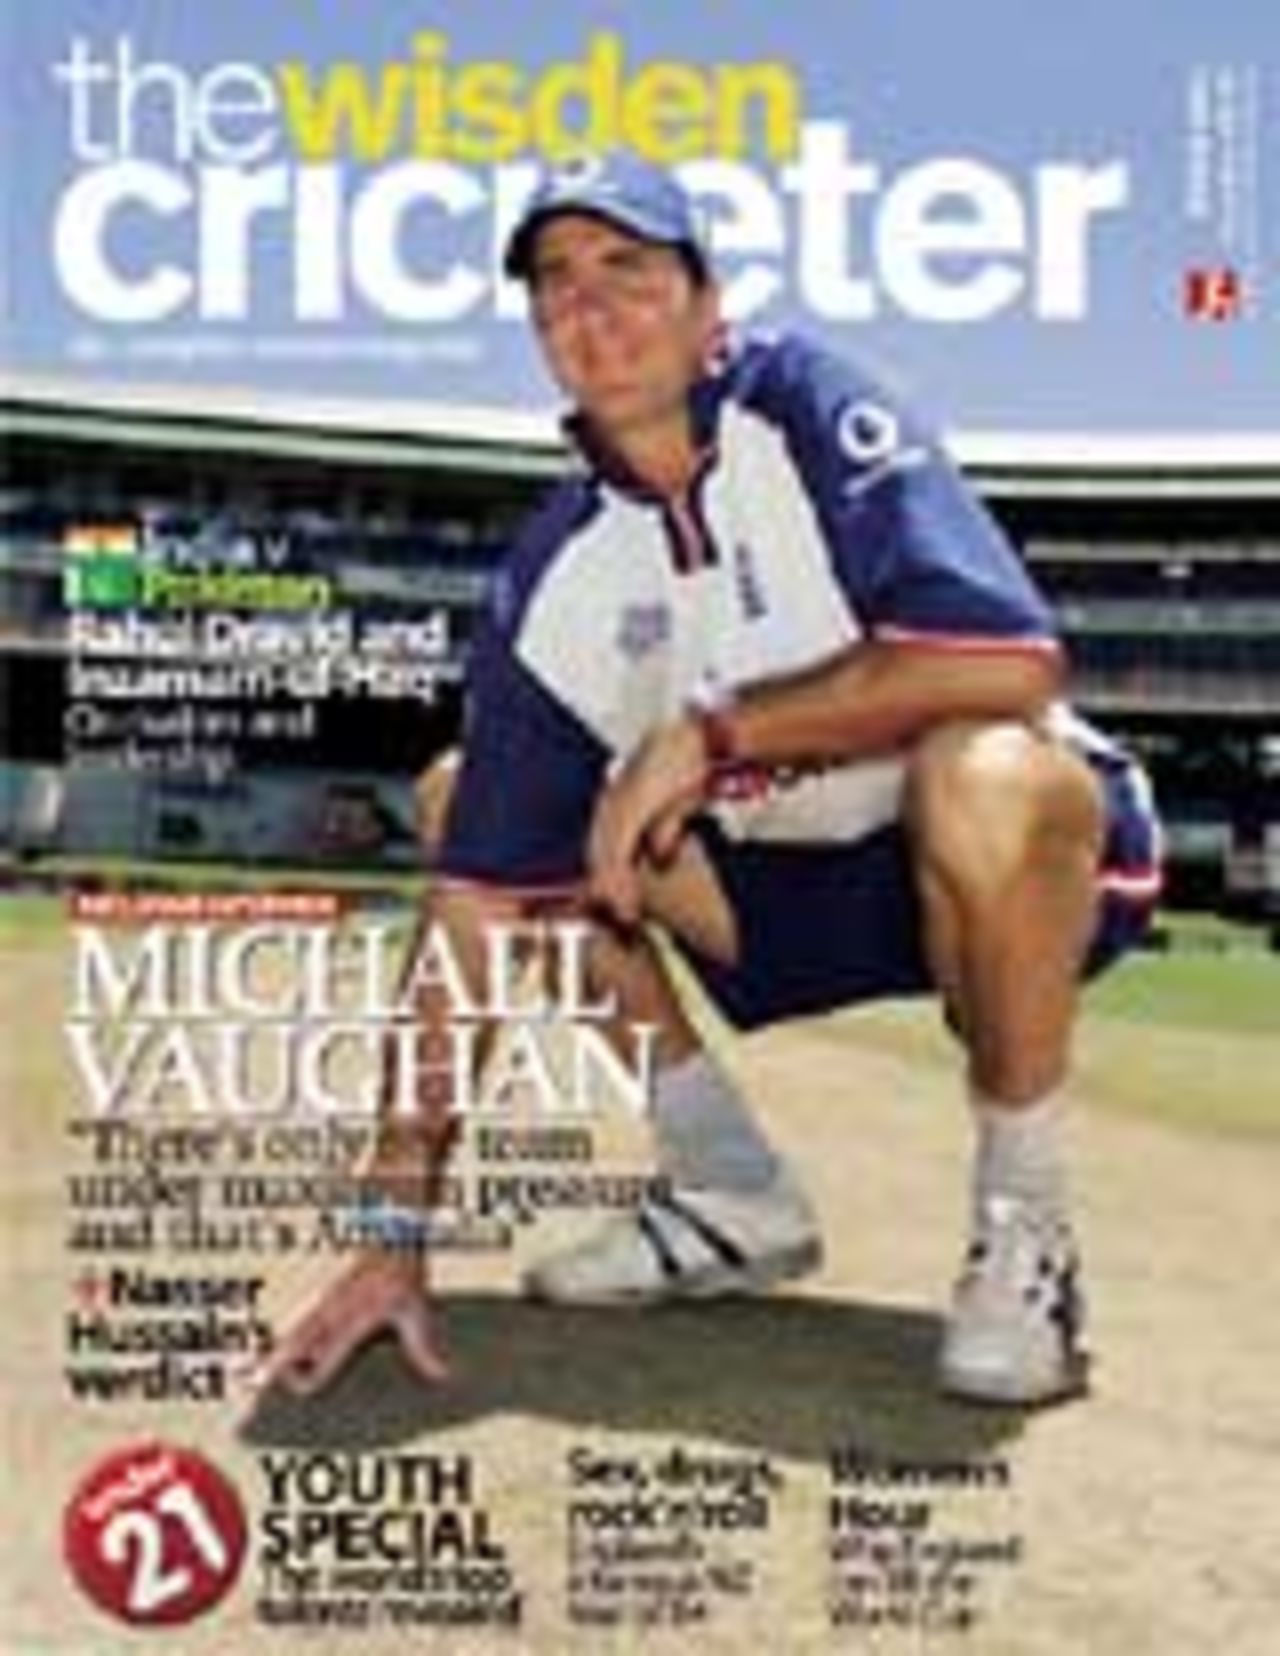 The Wisden Cricketer - February 2005 cover